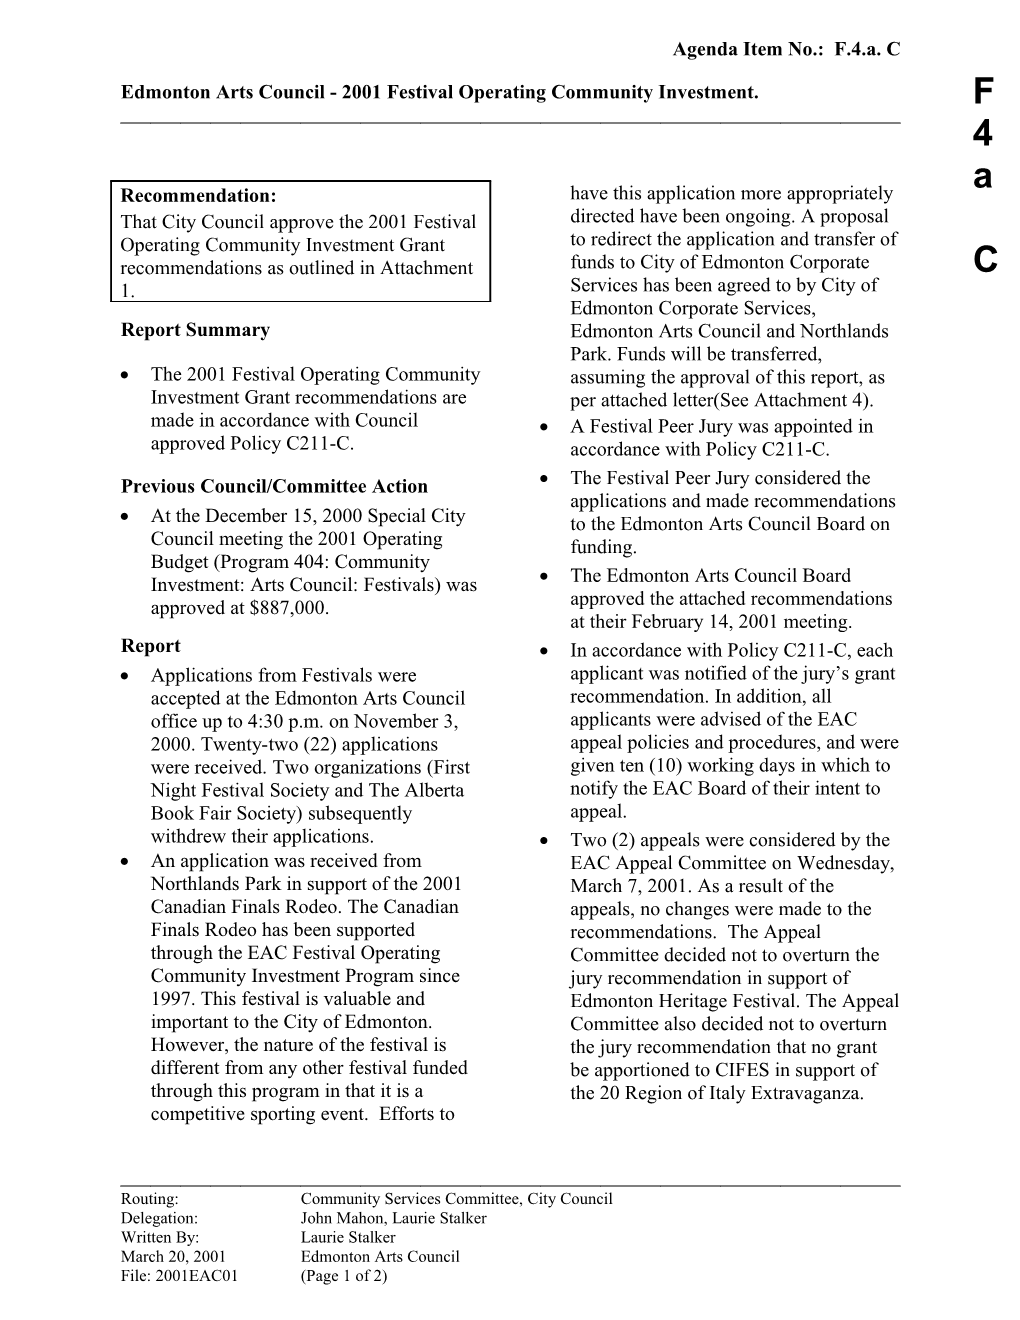 Report for Community Services Committee April 2, 2001 Meeting